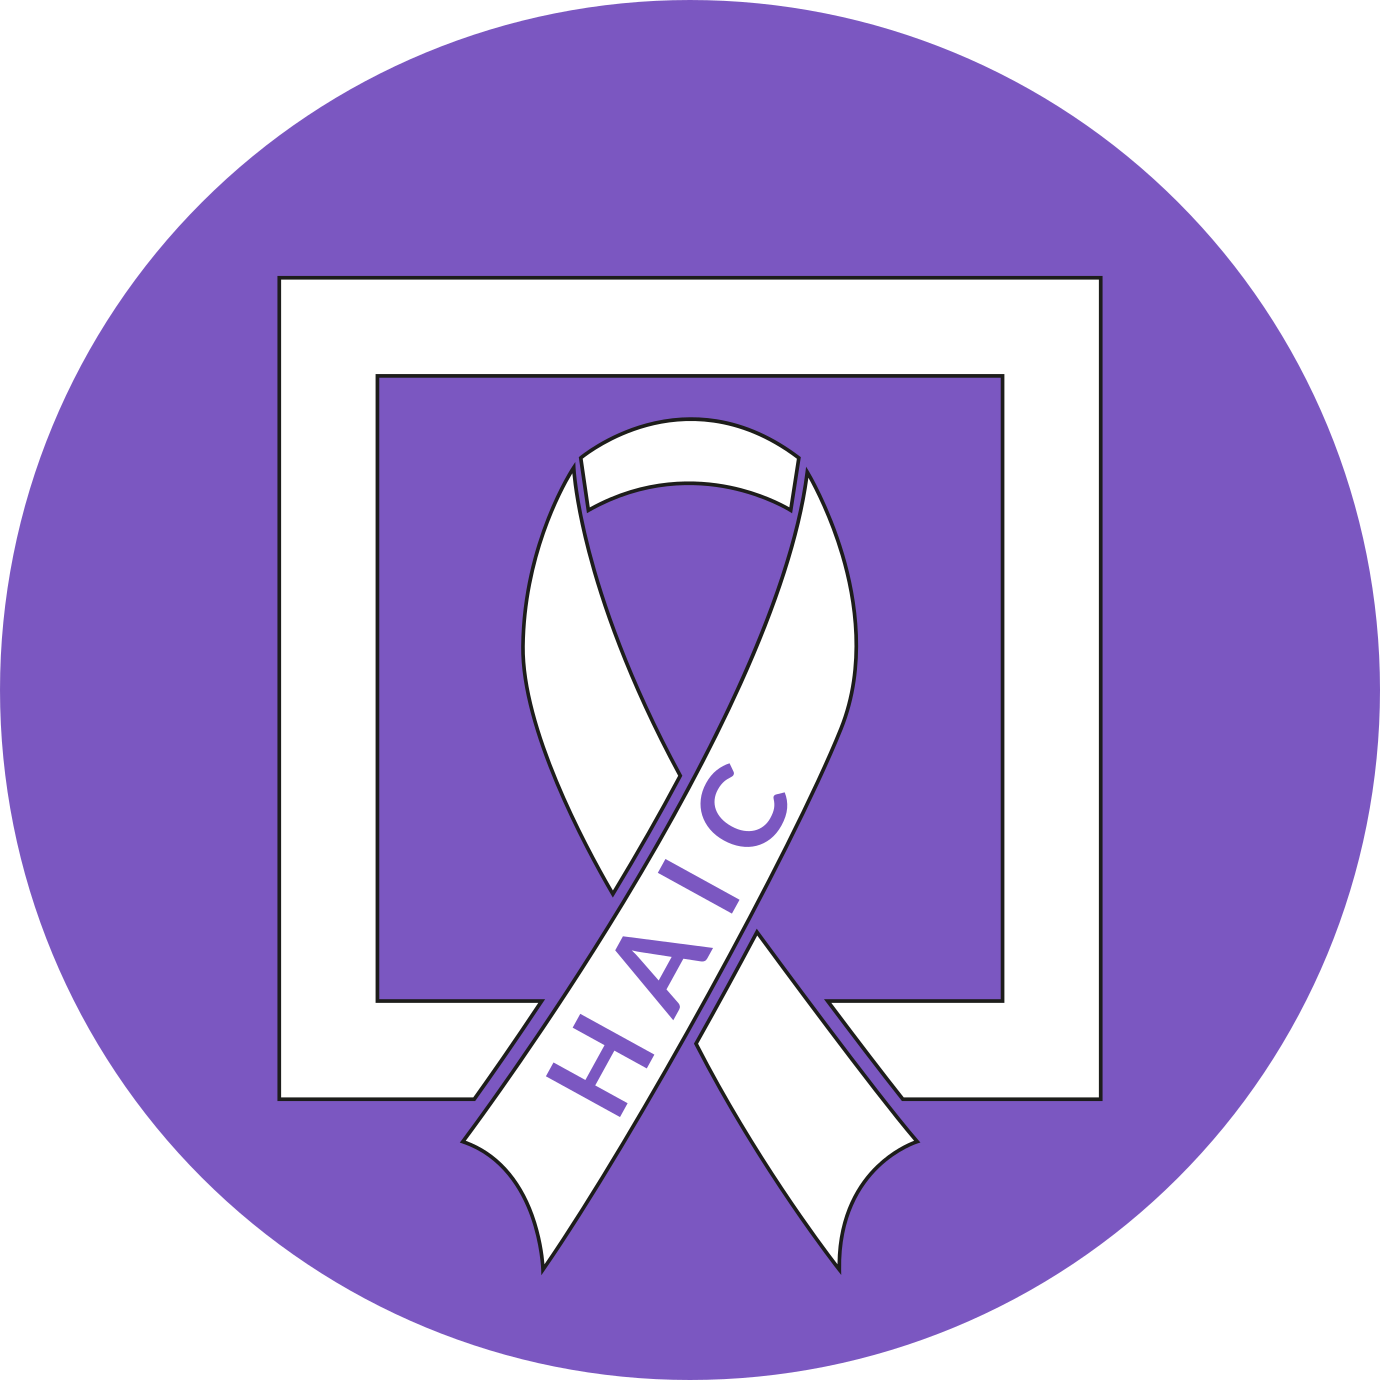 A white awareness ribbon with "HAIC" written on it in purple that is surrounded by a white box. These elements are enclosed by a purcle circle.